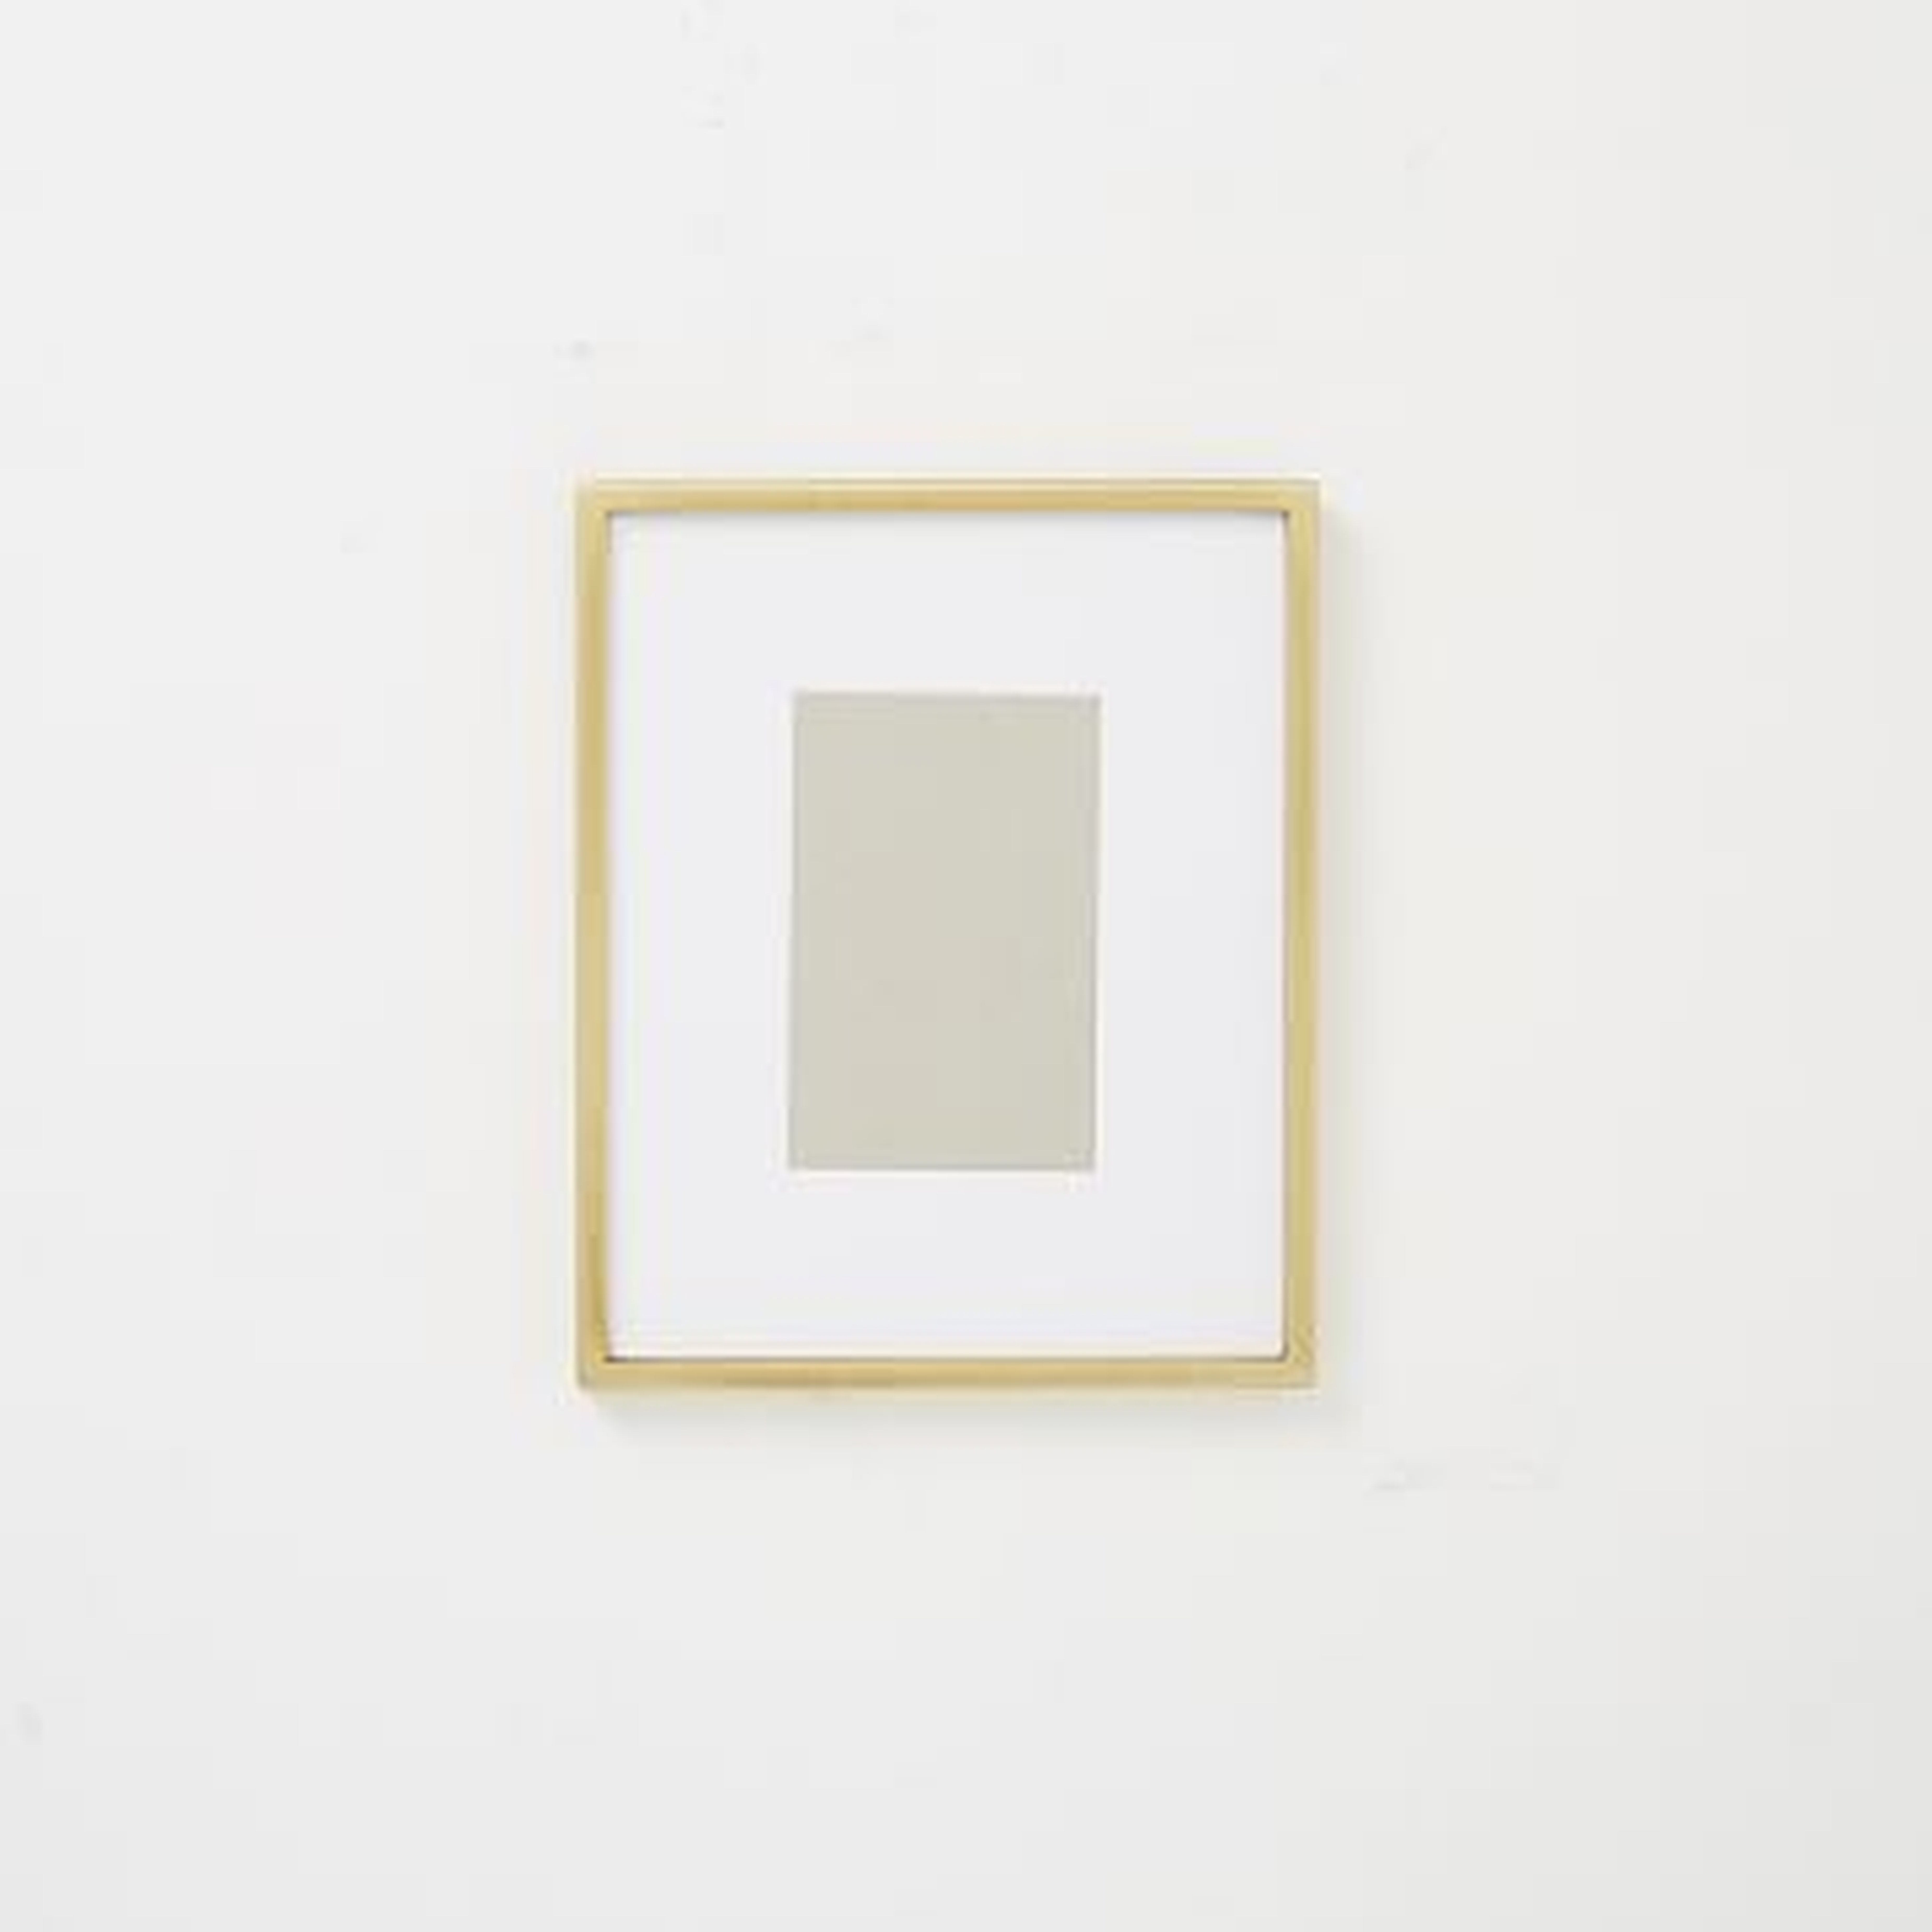 Gallery Frame, Polished Brass, 4" x 6" (8" x 10" without mat) - West Elm